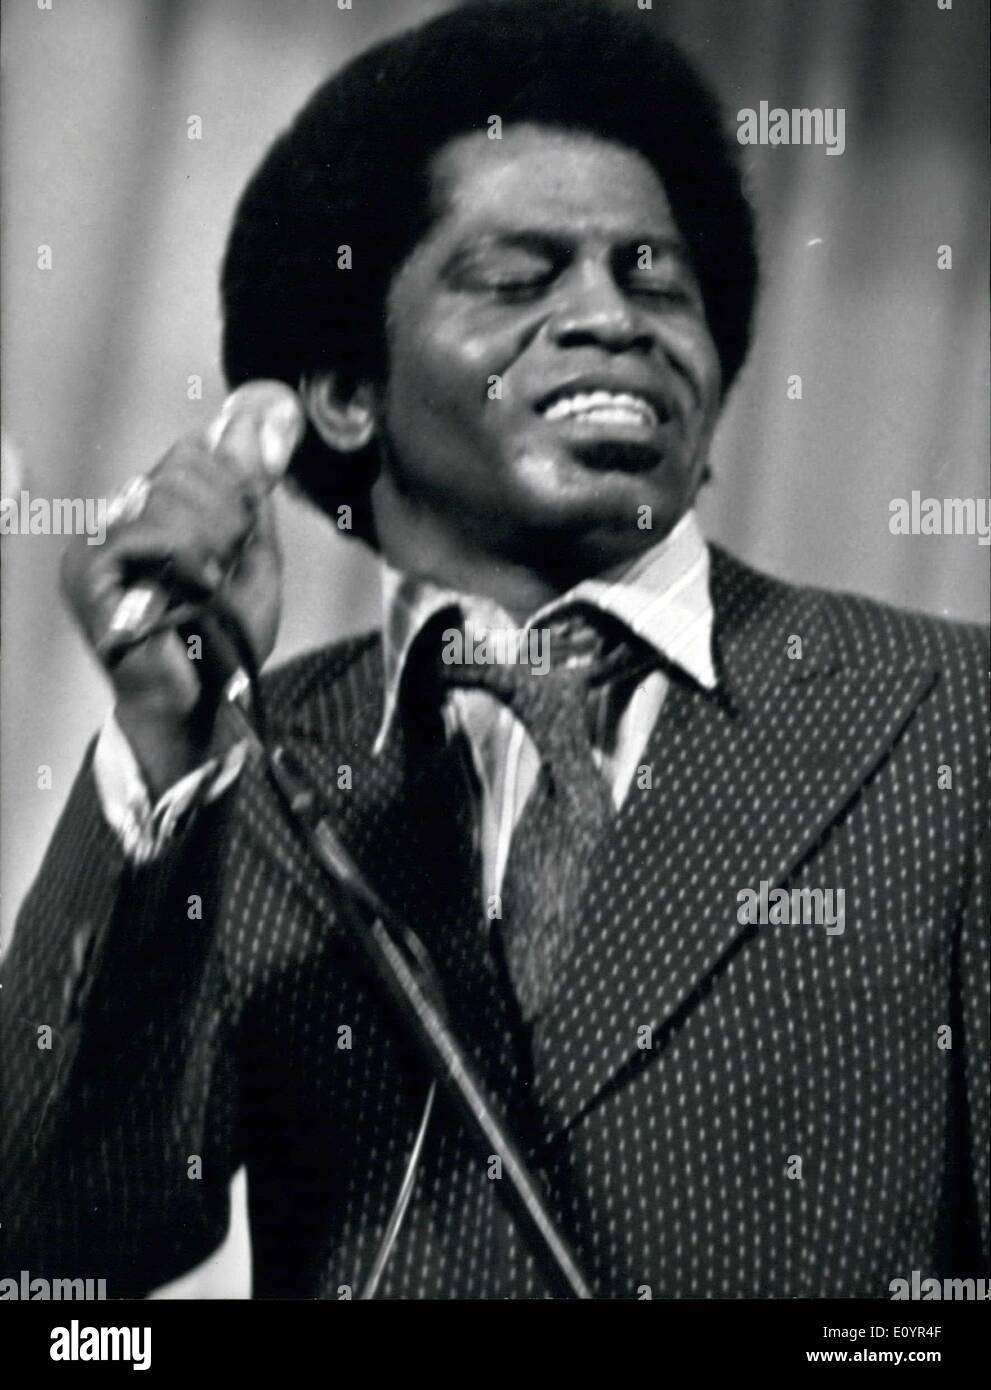 Mar. 09, 1971 - The famous American singer James Brown pictured was a complete success during his three days performing his 'S Stock Photo